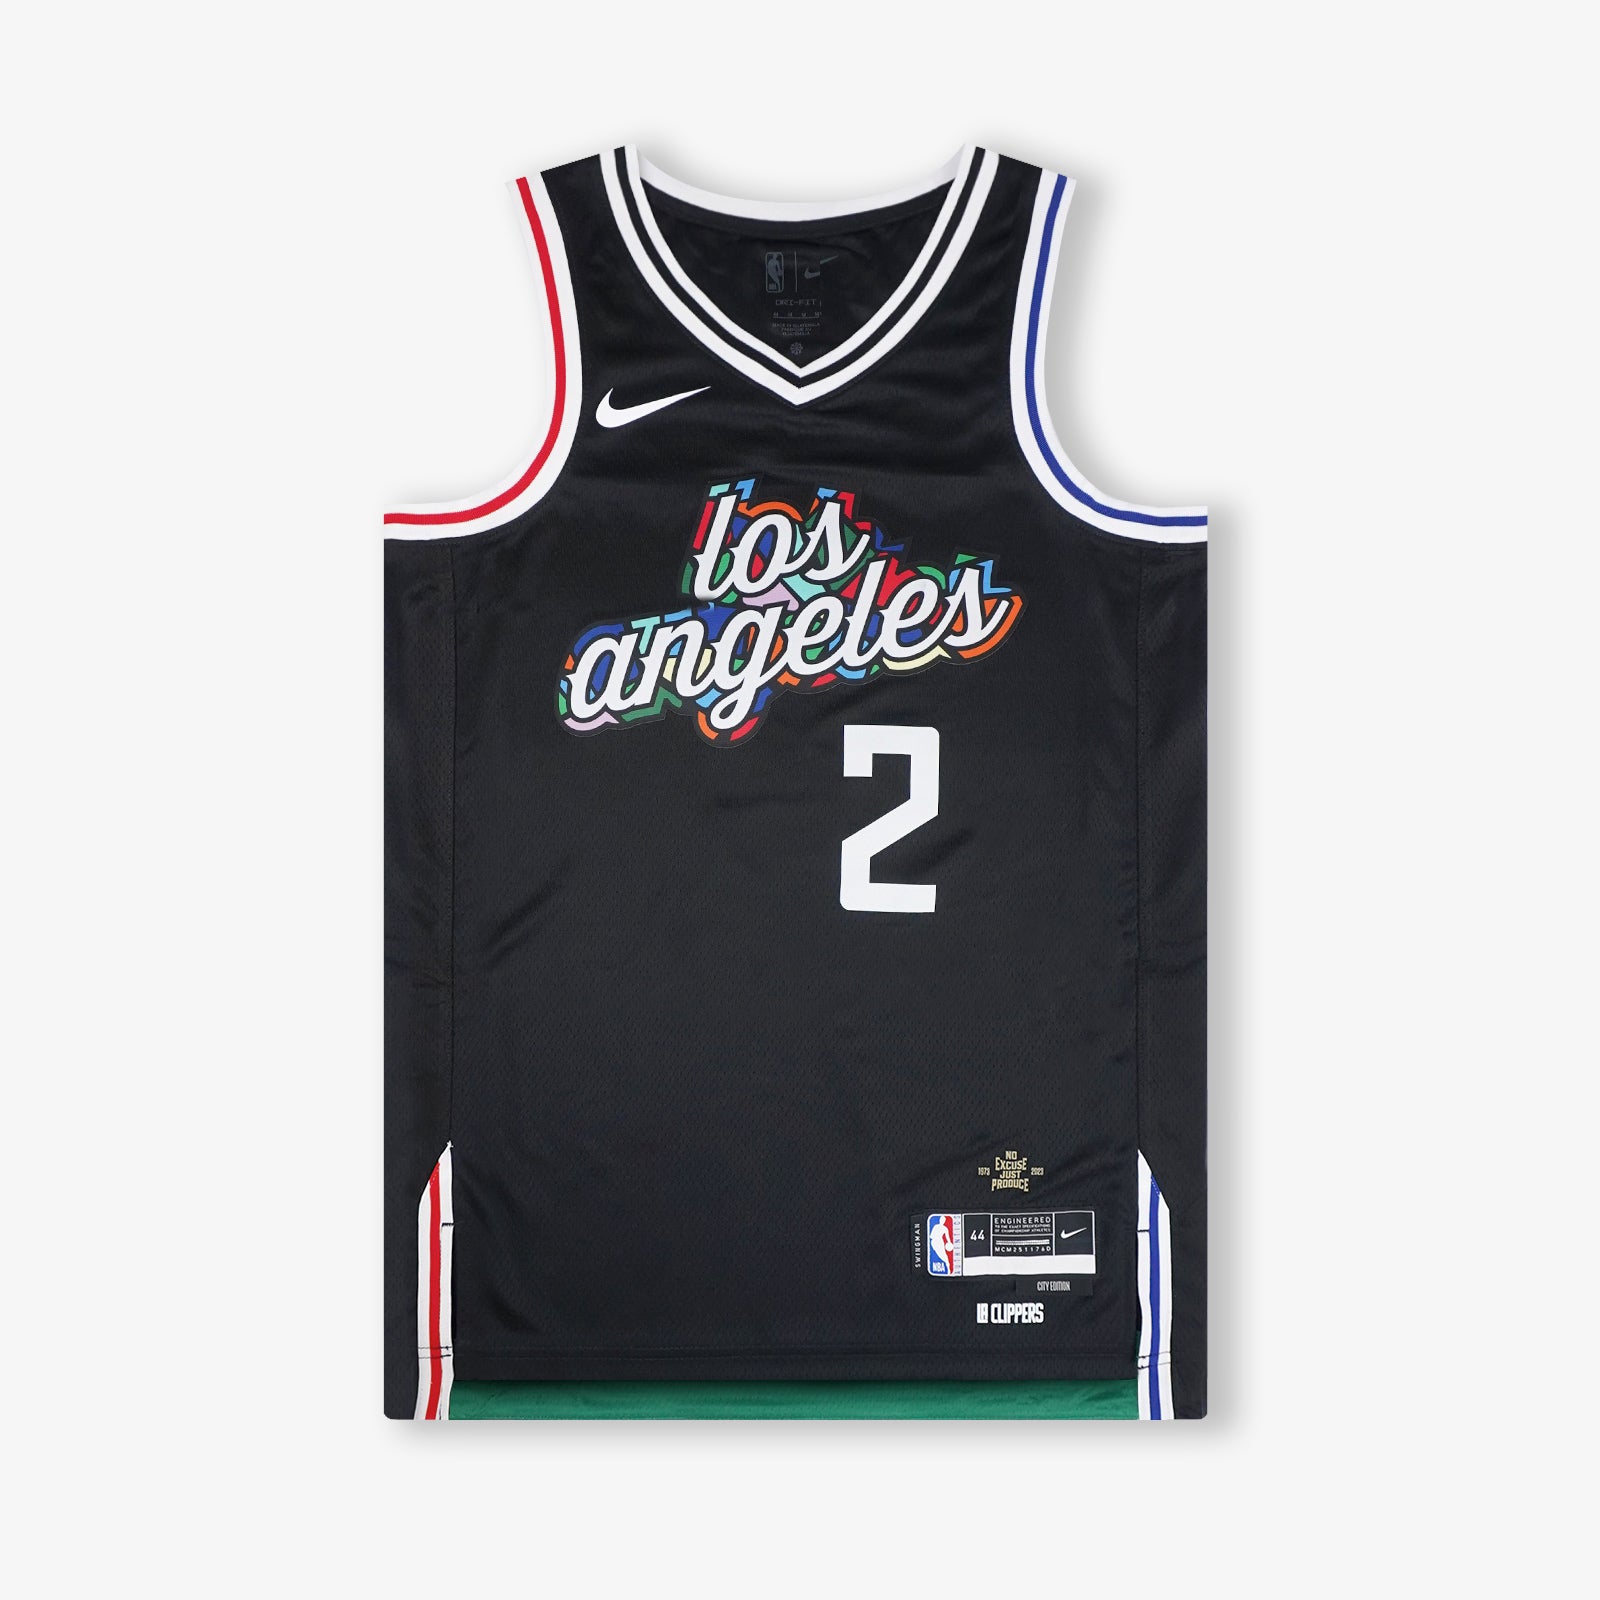 Los Angeles Clippers Jersey For Babies, Youth, Women, or Men